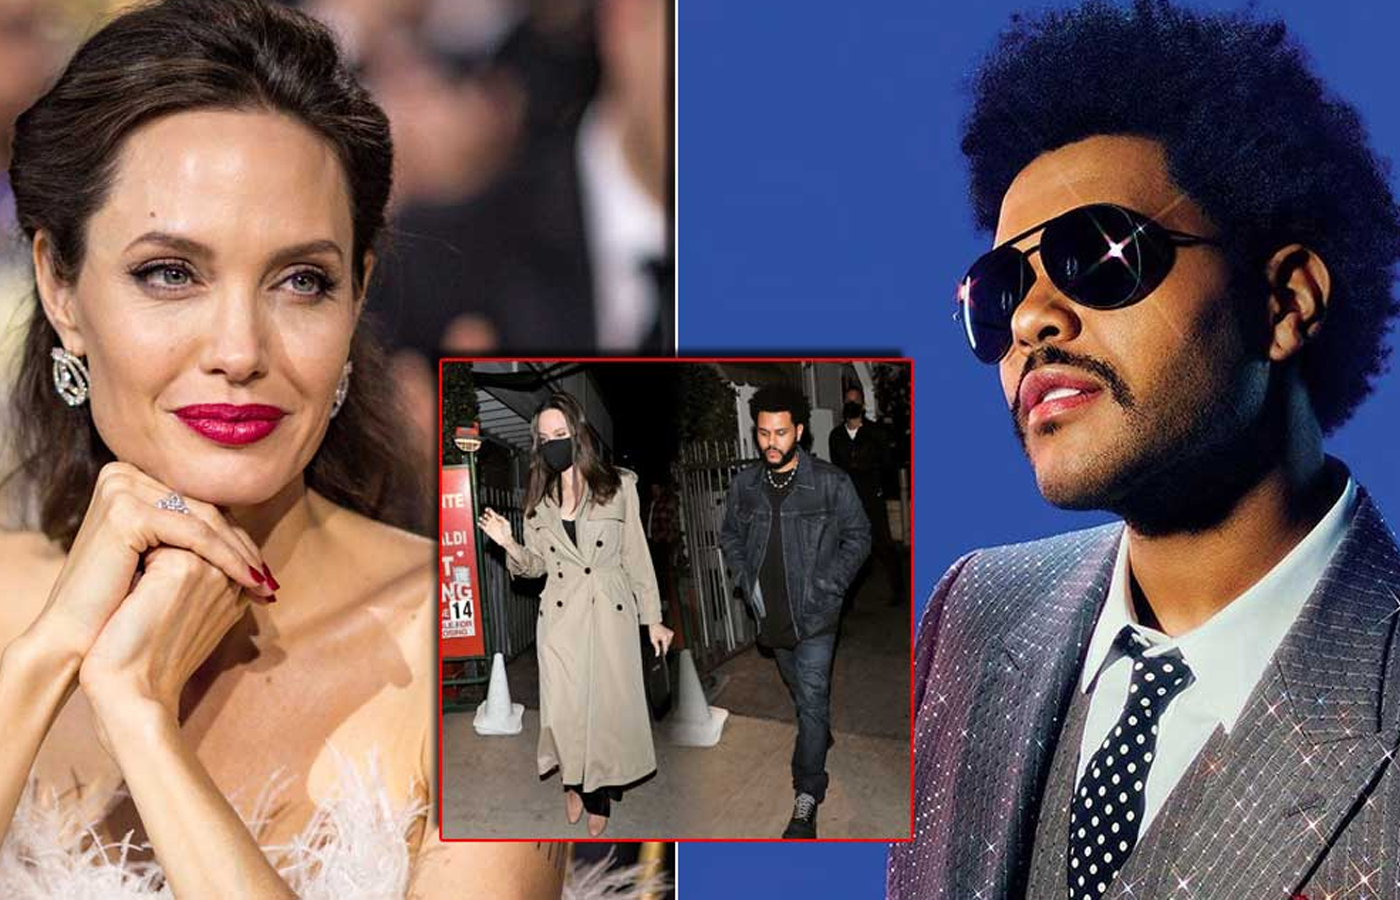 angelina-jolie-and-the-weeknd-reportedly-had-dinner-together-in-hollywood-restaurant